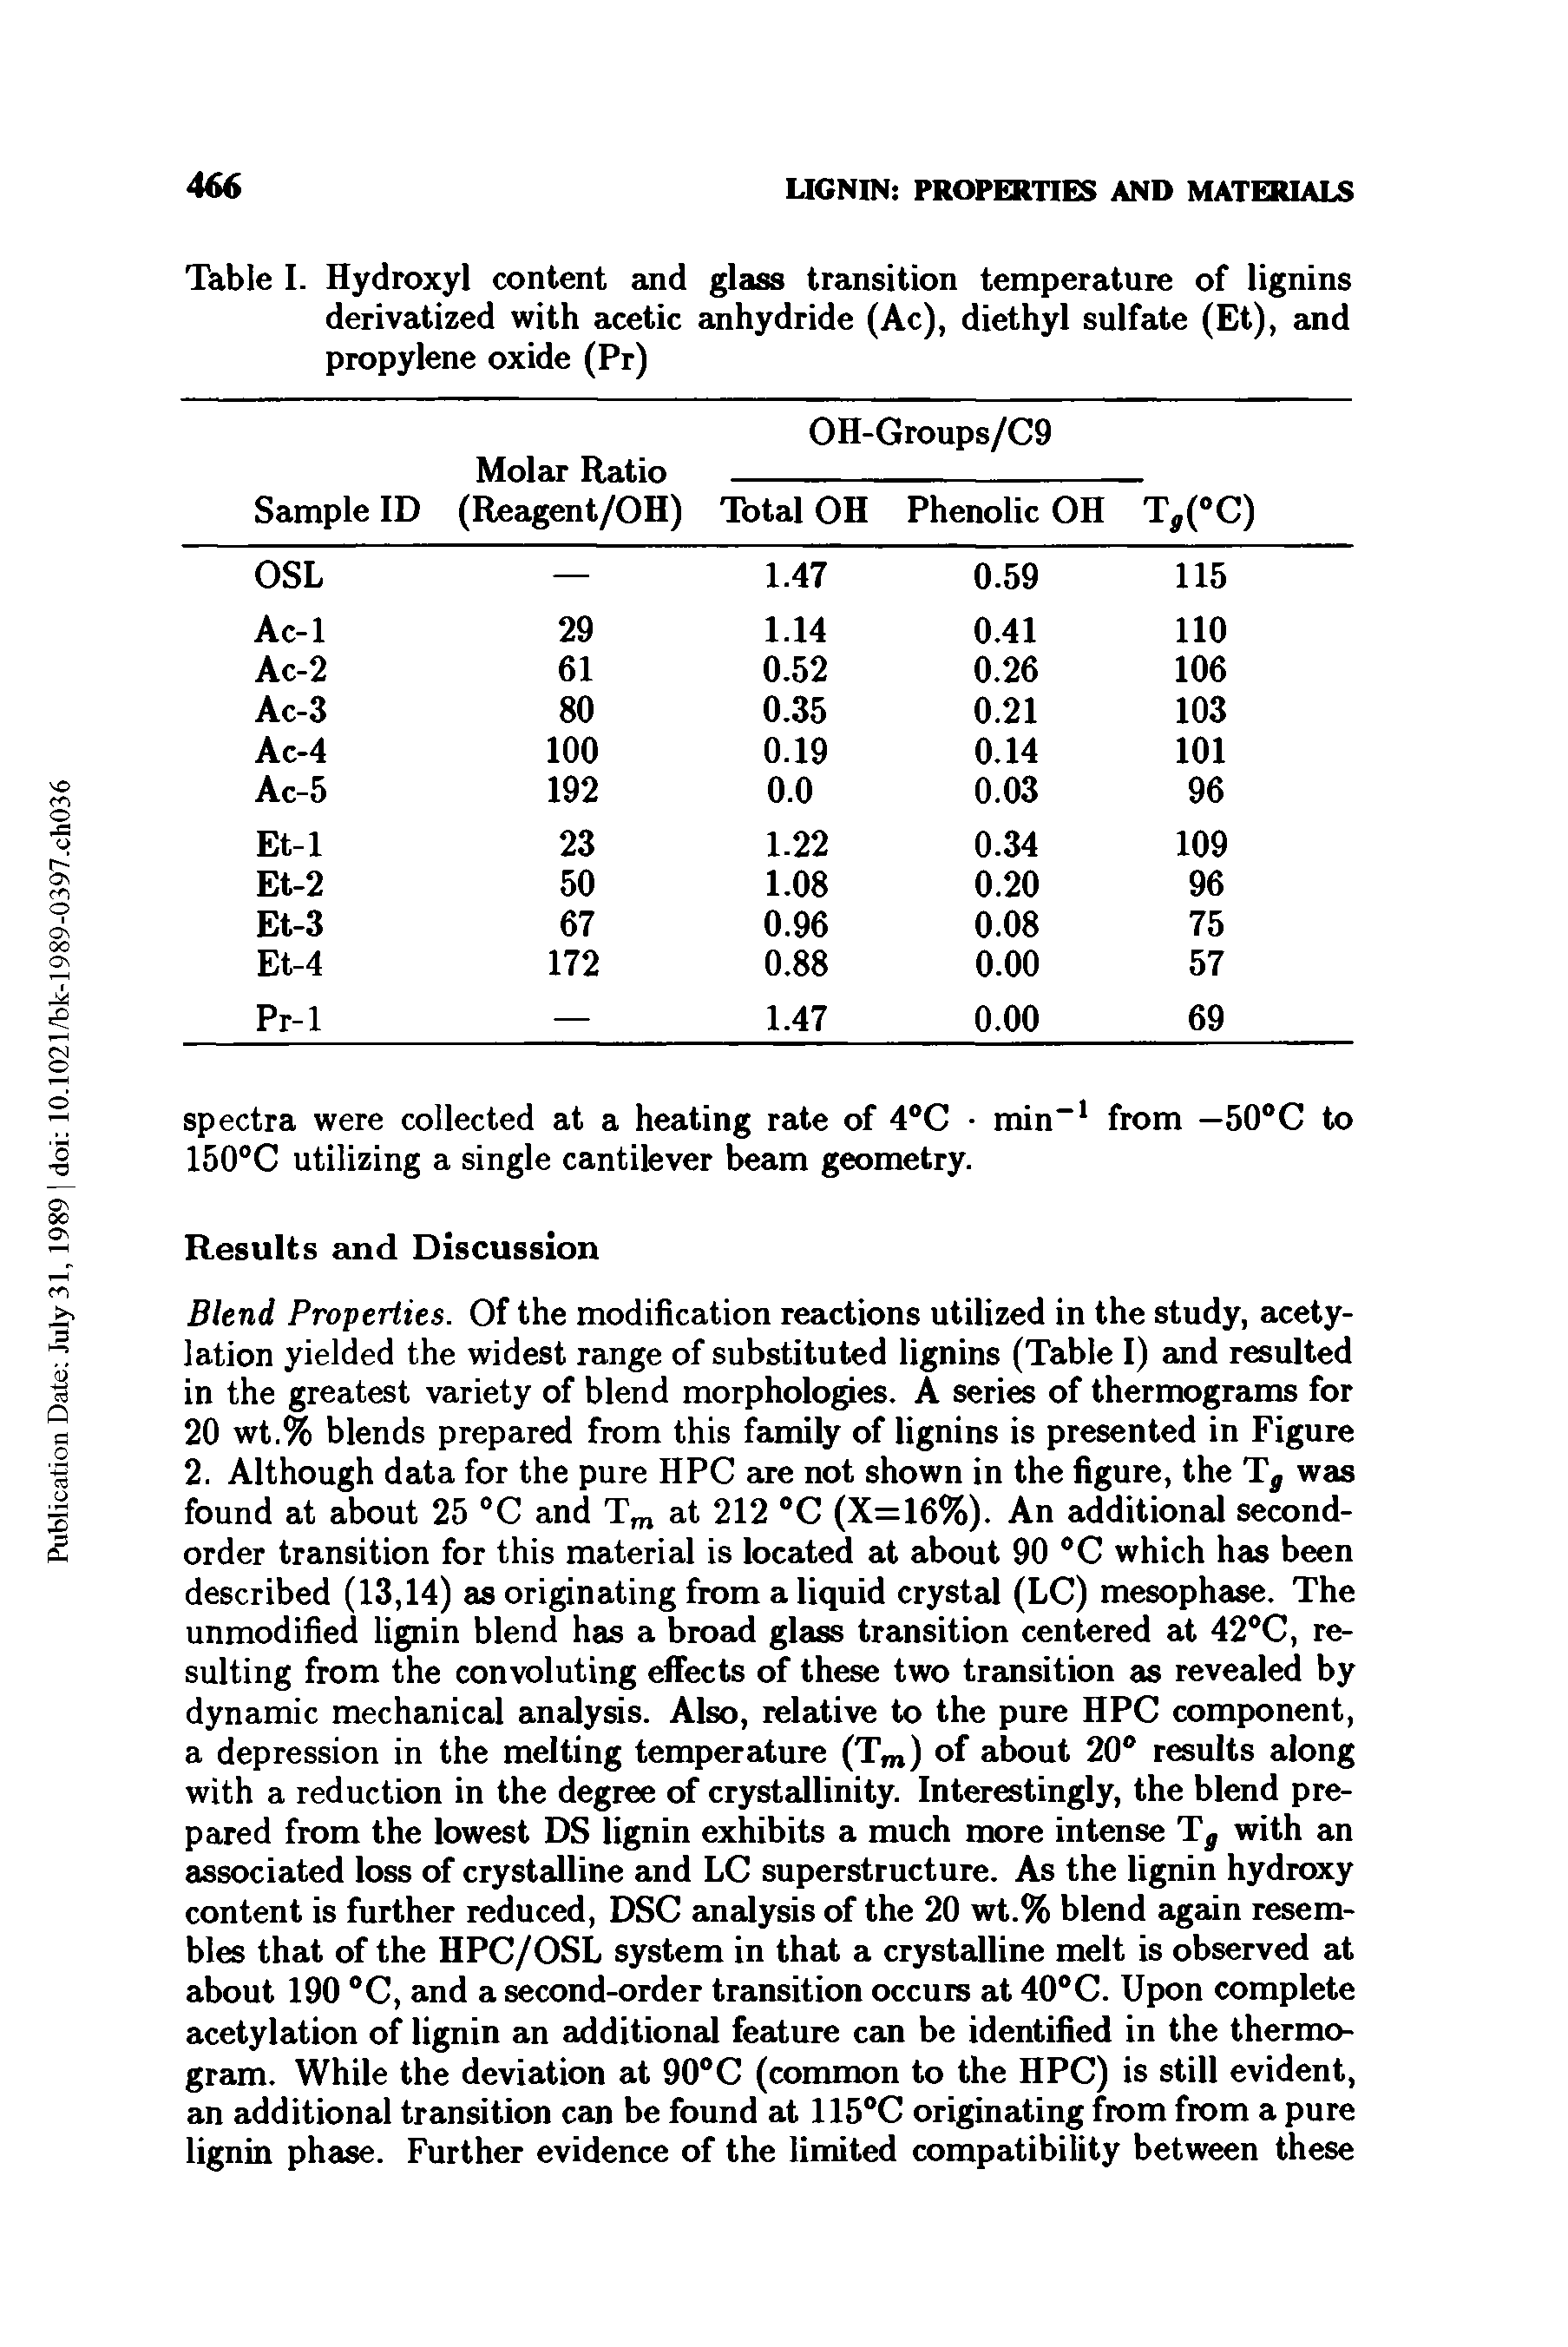 Table I. Hydroxyl content and glass transition temperature of lignins derivatized with acetic anhydride (Ac), diethyl sulfate (Et), and propylene oxide (Pr)...